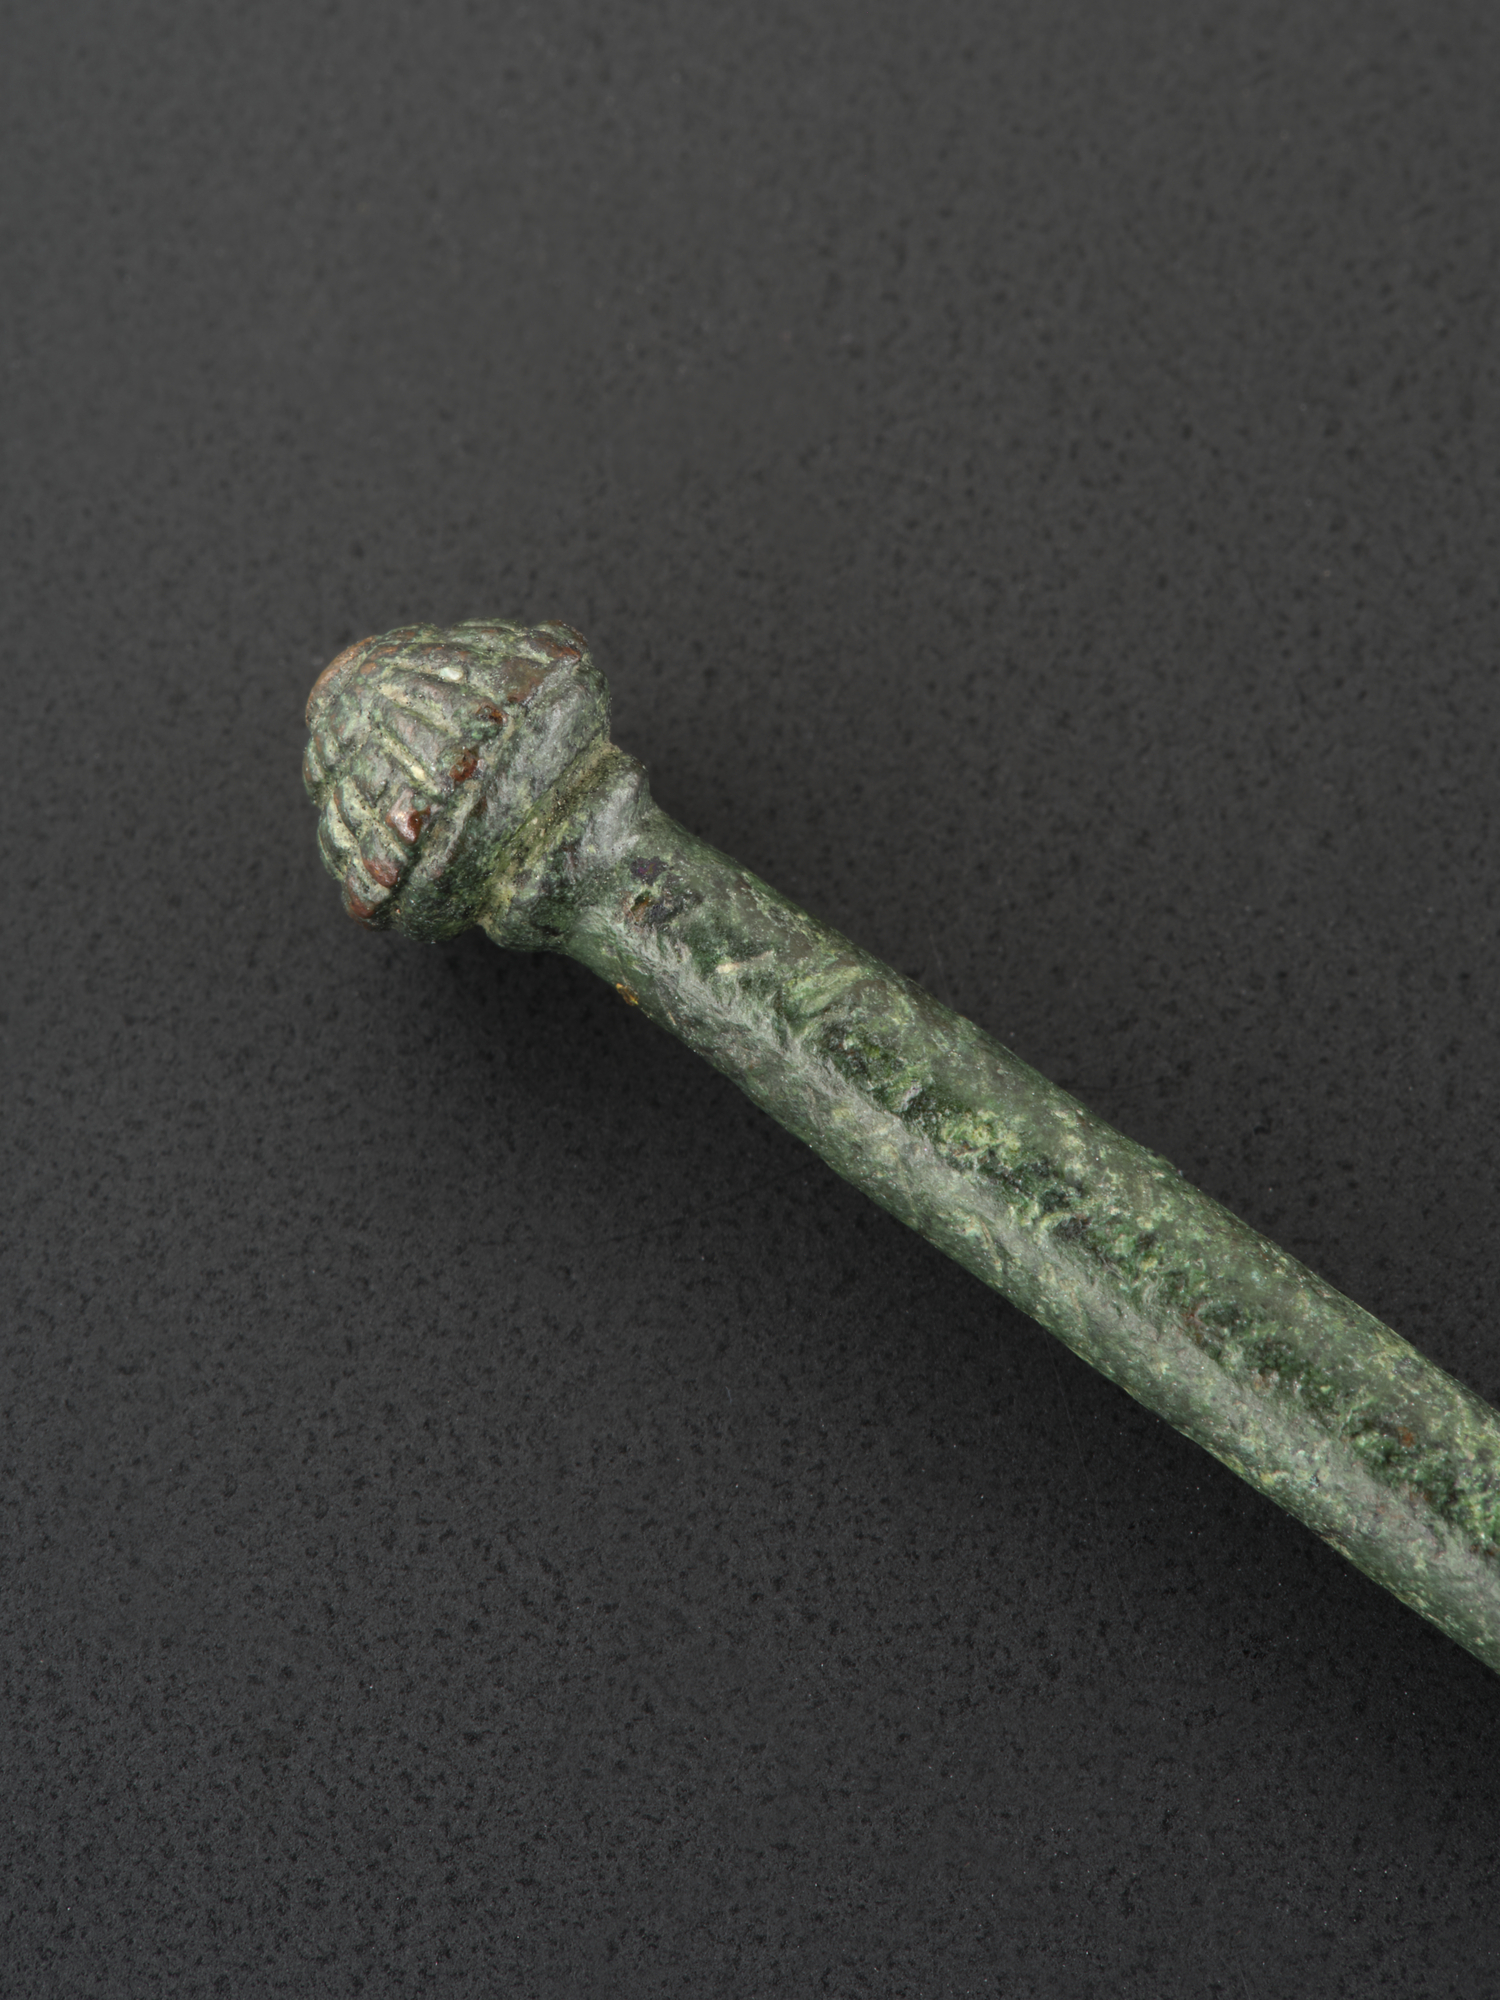 Image of Pin of copper alloy, with a conical head and incised lines, from Tiree, Argyll © National Museums Scotland